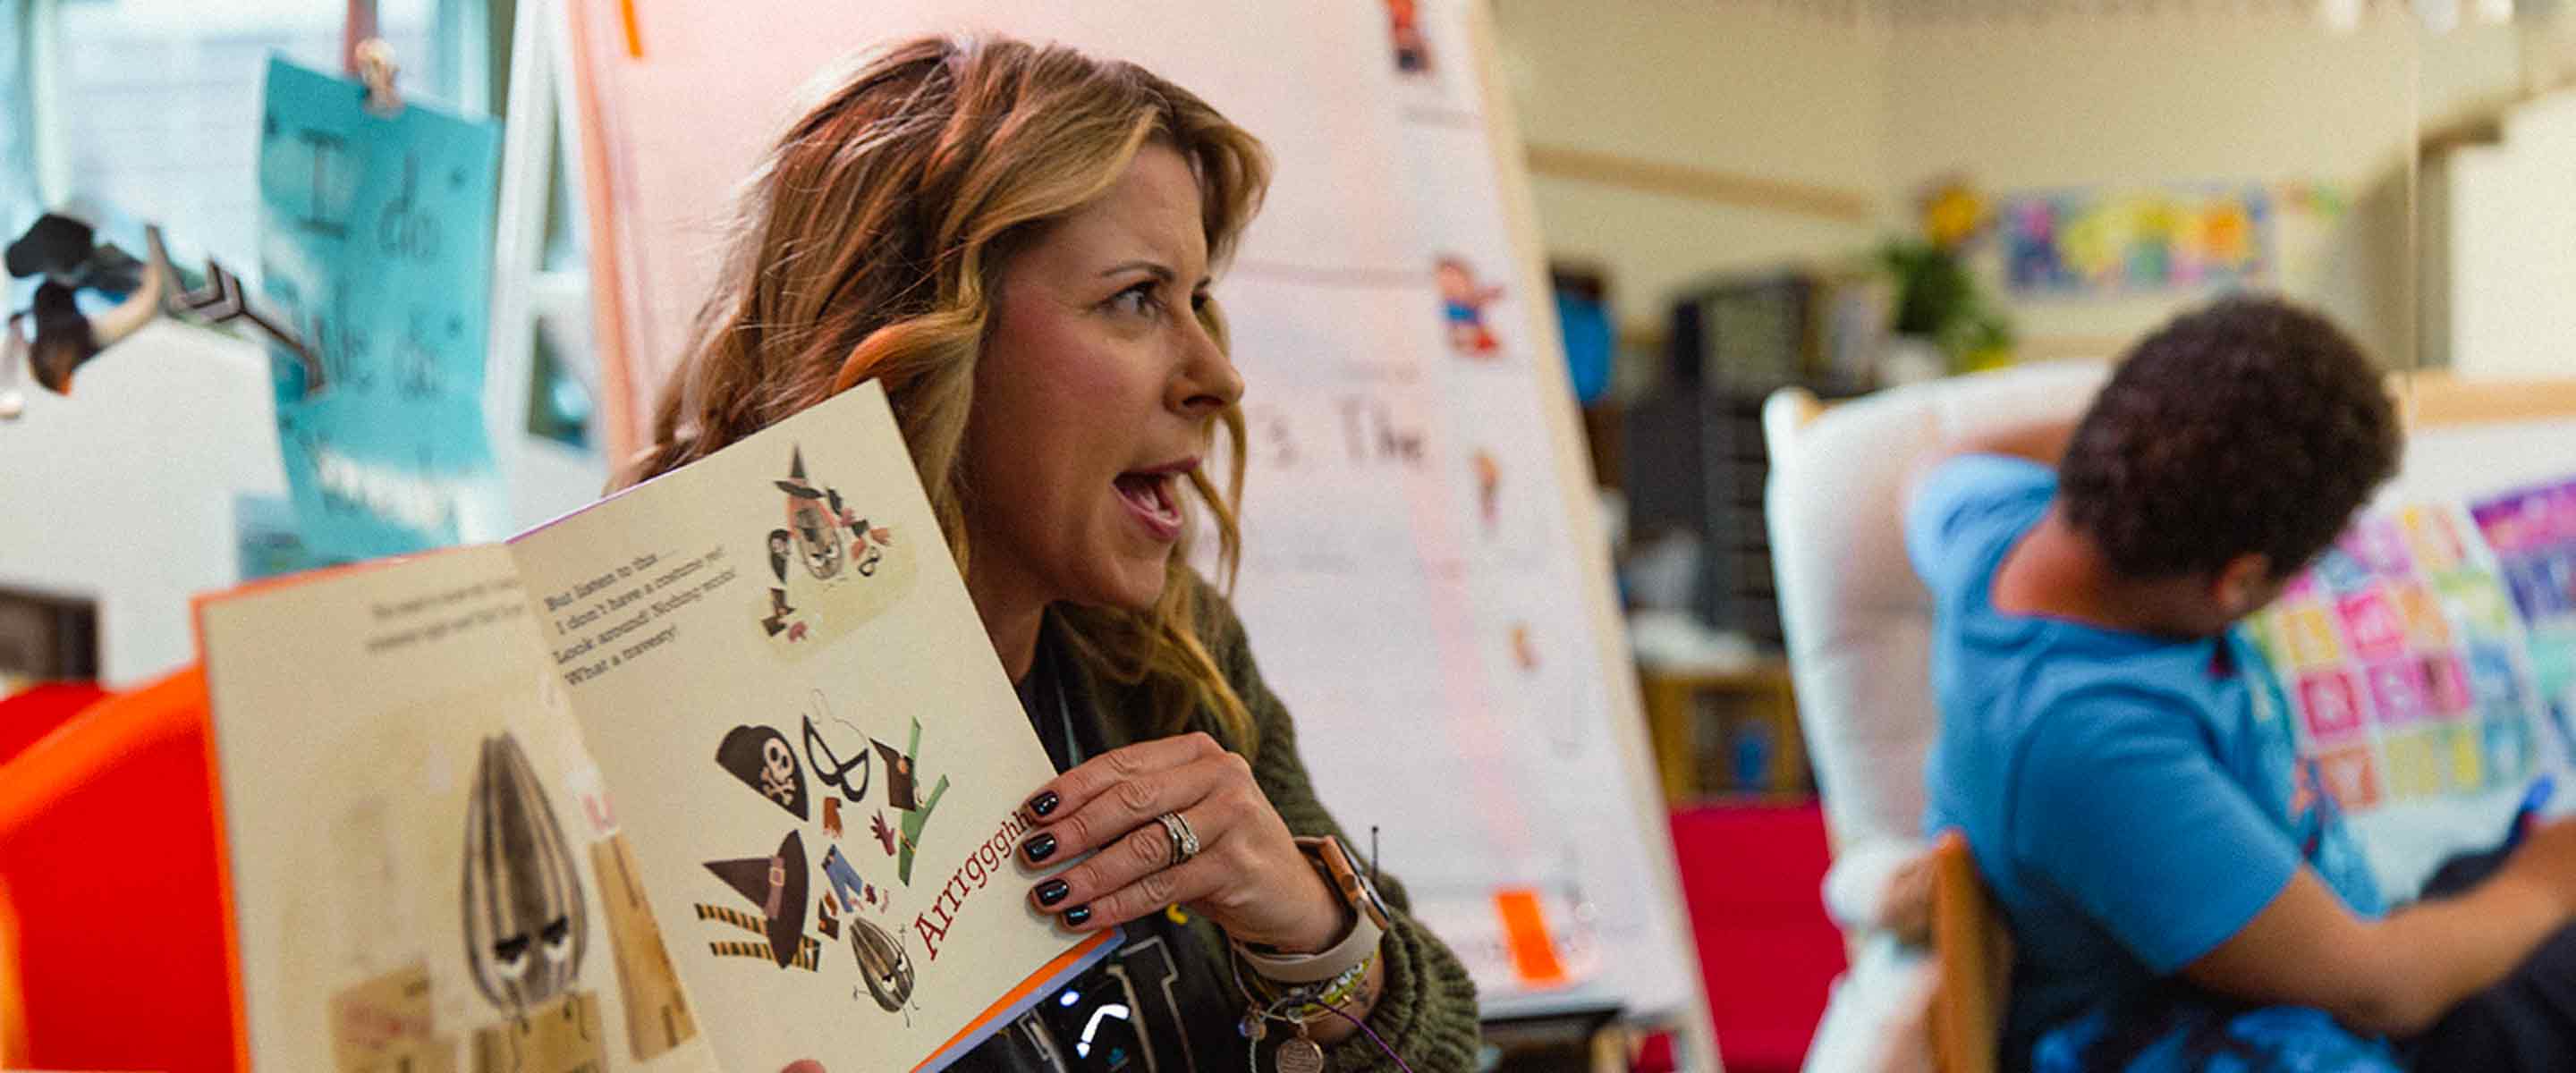 A person with shoulder-length hair and a wristwatch is energetically reading aloud from a book to an audience, not in the frame. They are wearing a dark cardigan and rings on their fingers. The book cover features playful illustrations, possibly related to children's literature. In the background, a large paper is mounted on the wall with various colorful visual aids, suggesting an educational or classroom setting. Another individual, partly out of focus and facing away from the camera, is seated nearby, engrossed in reading or studying a document with a vibrant pattern.